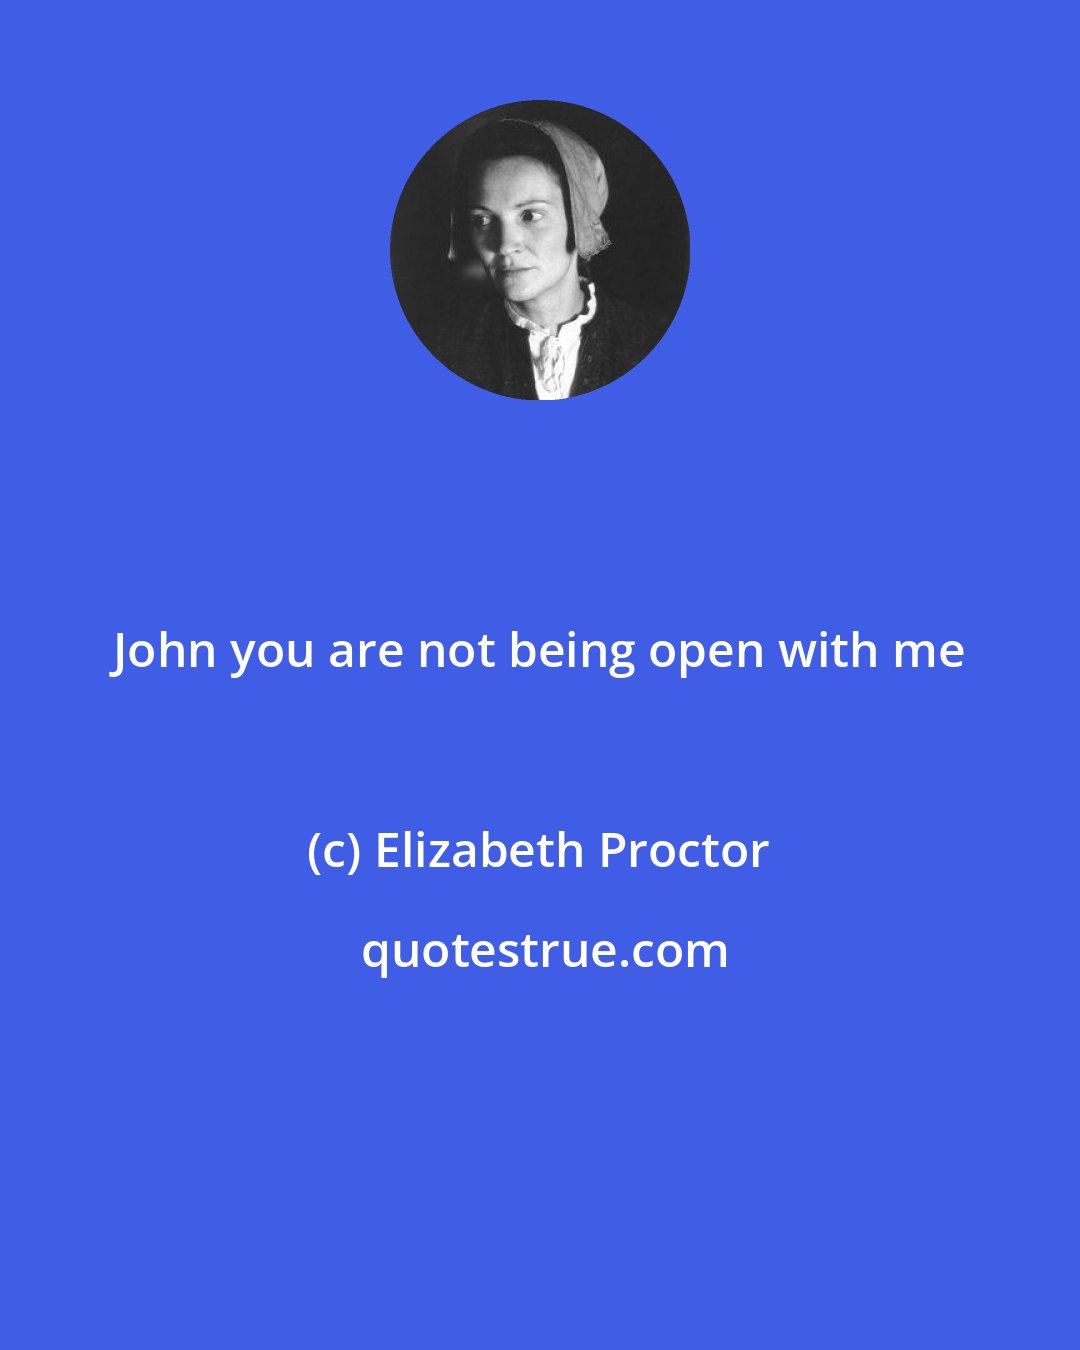 Elizabeth Proctor: John you are not being open with me